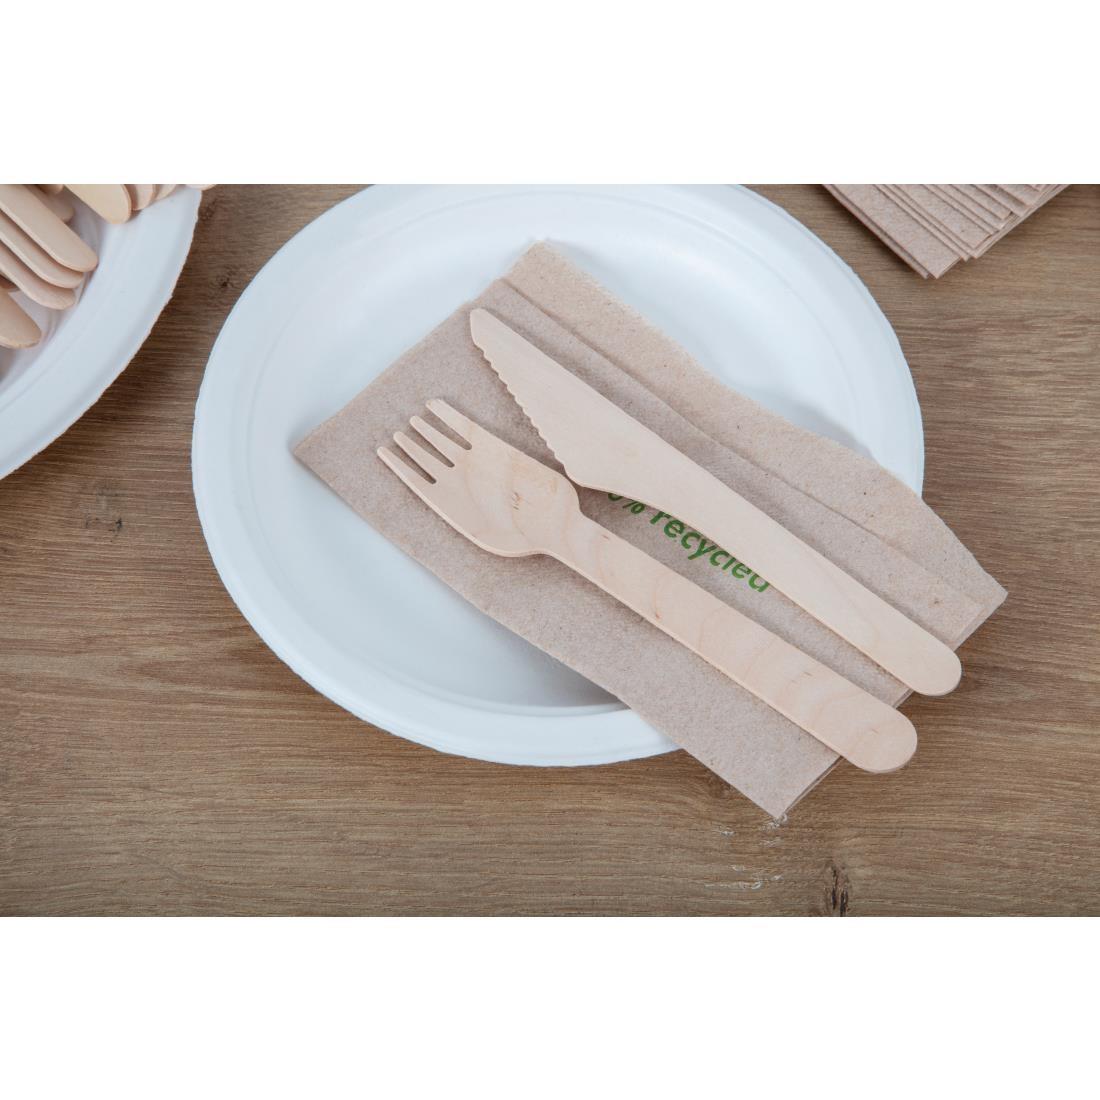 Fiesta Compostable Disposable Wooden Knives (Pack of 100) - CD902  - 7